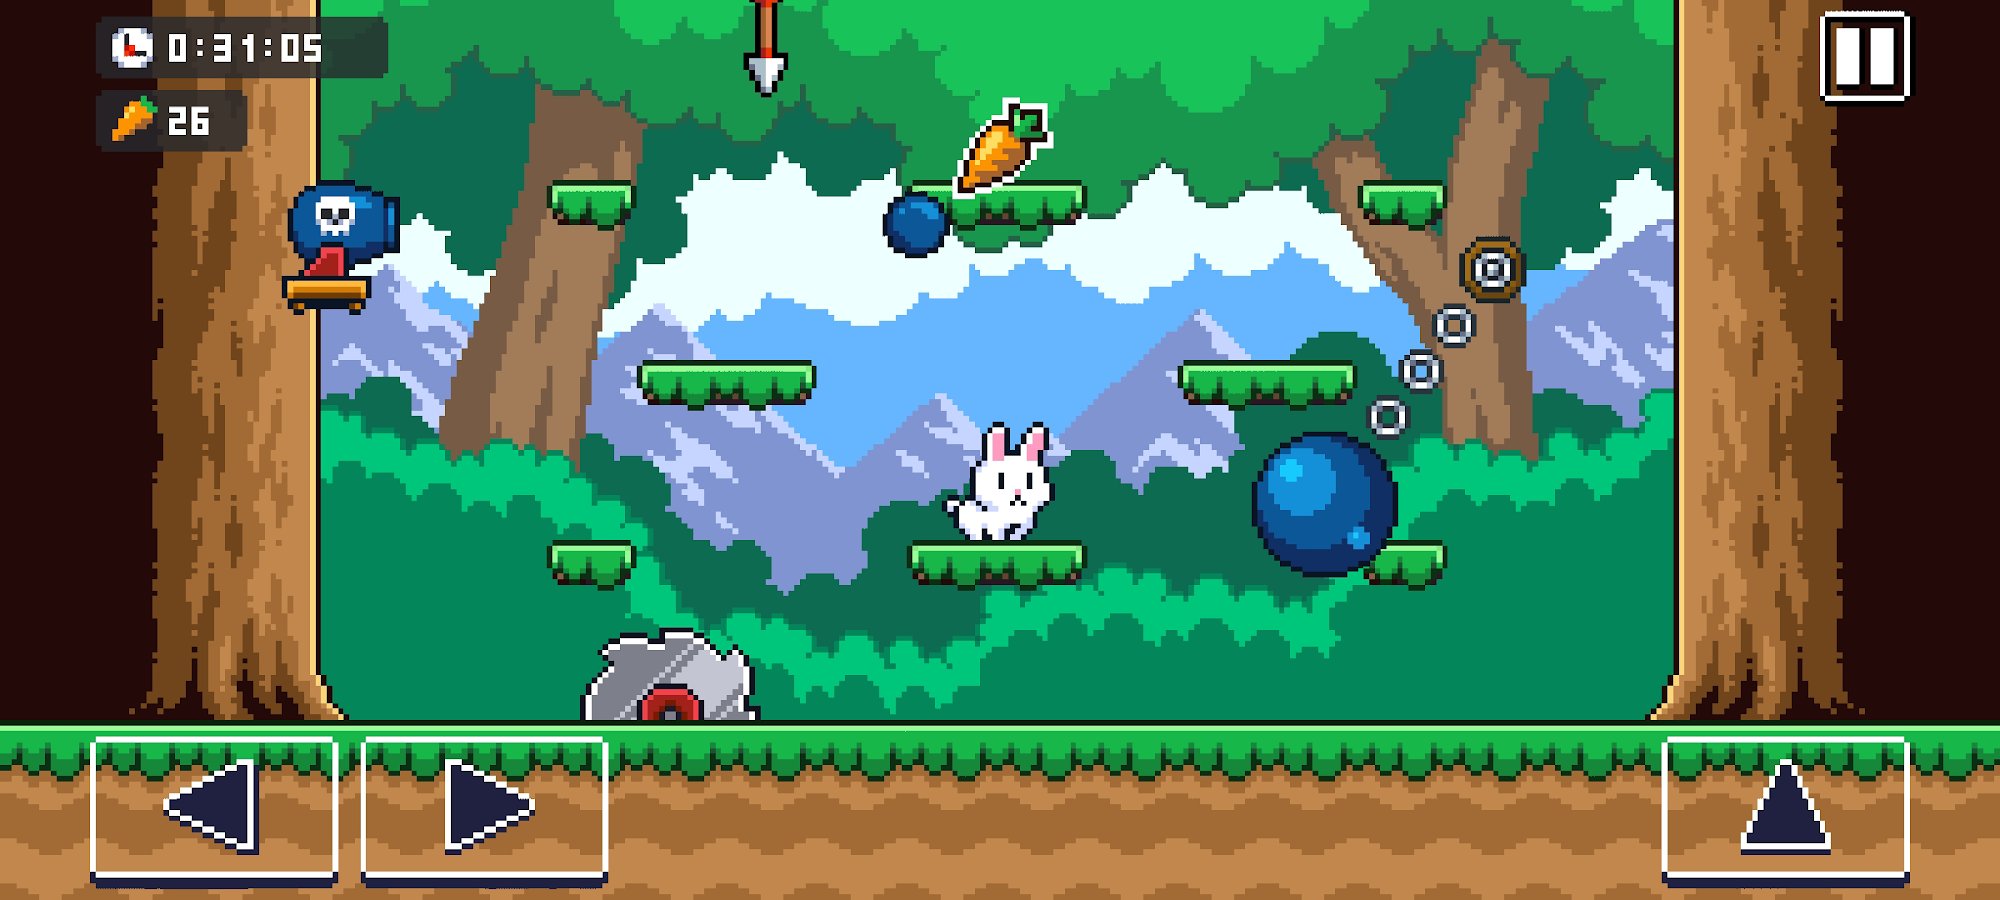 Poor Bunny! v1.0.1 APK for Android